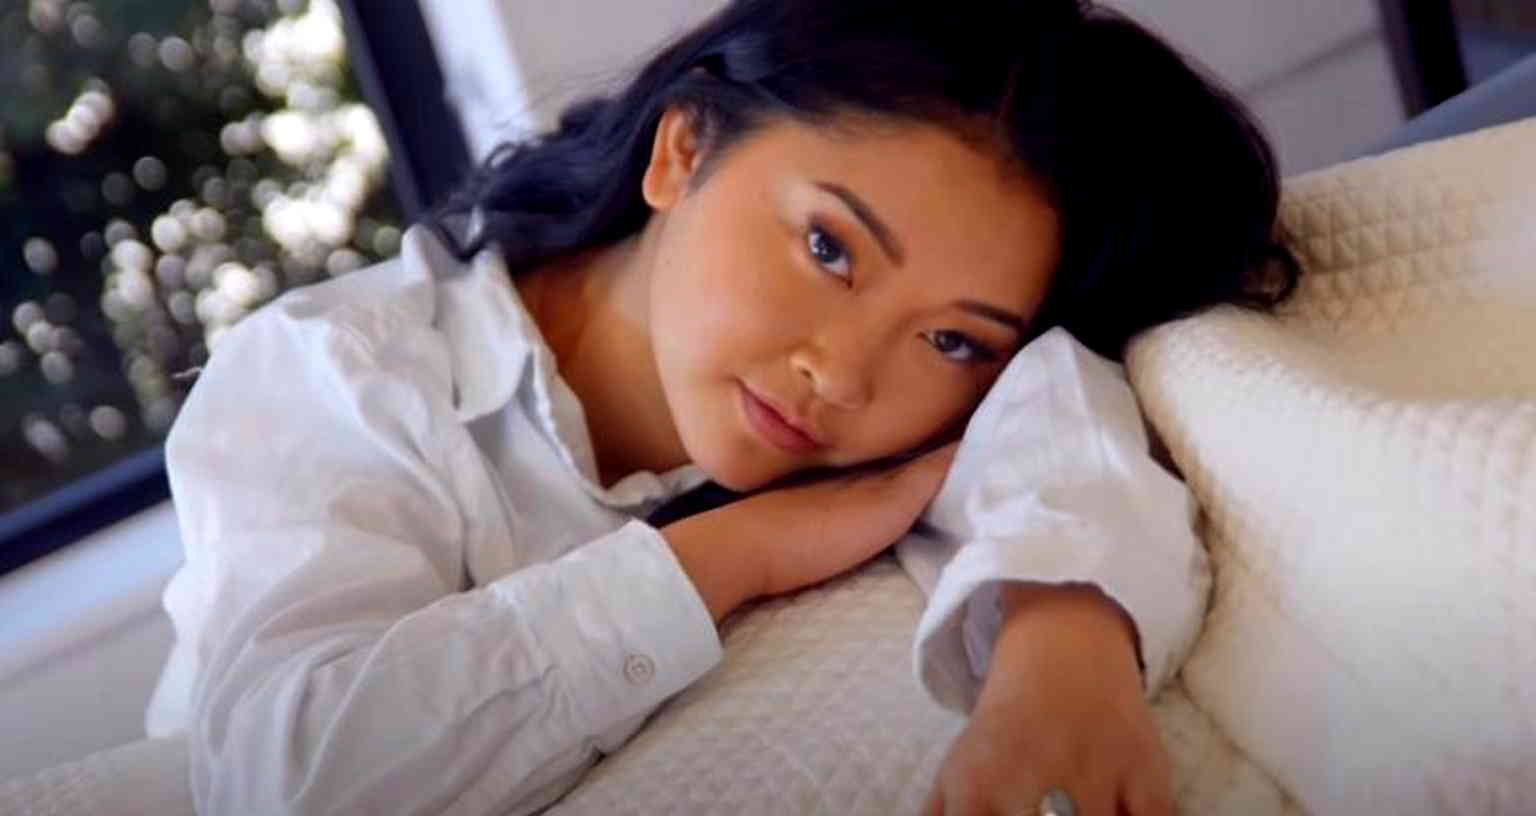 Lana Condor and Cole Sprouse head to Mars in upcoming sci-fi romantic comedy ‘Moonshot’